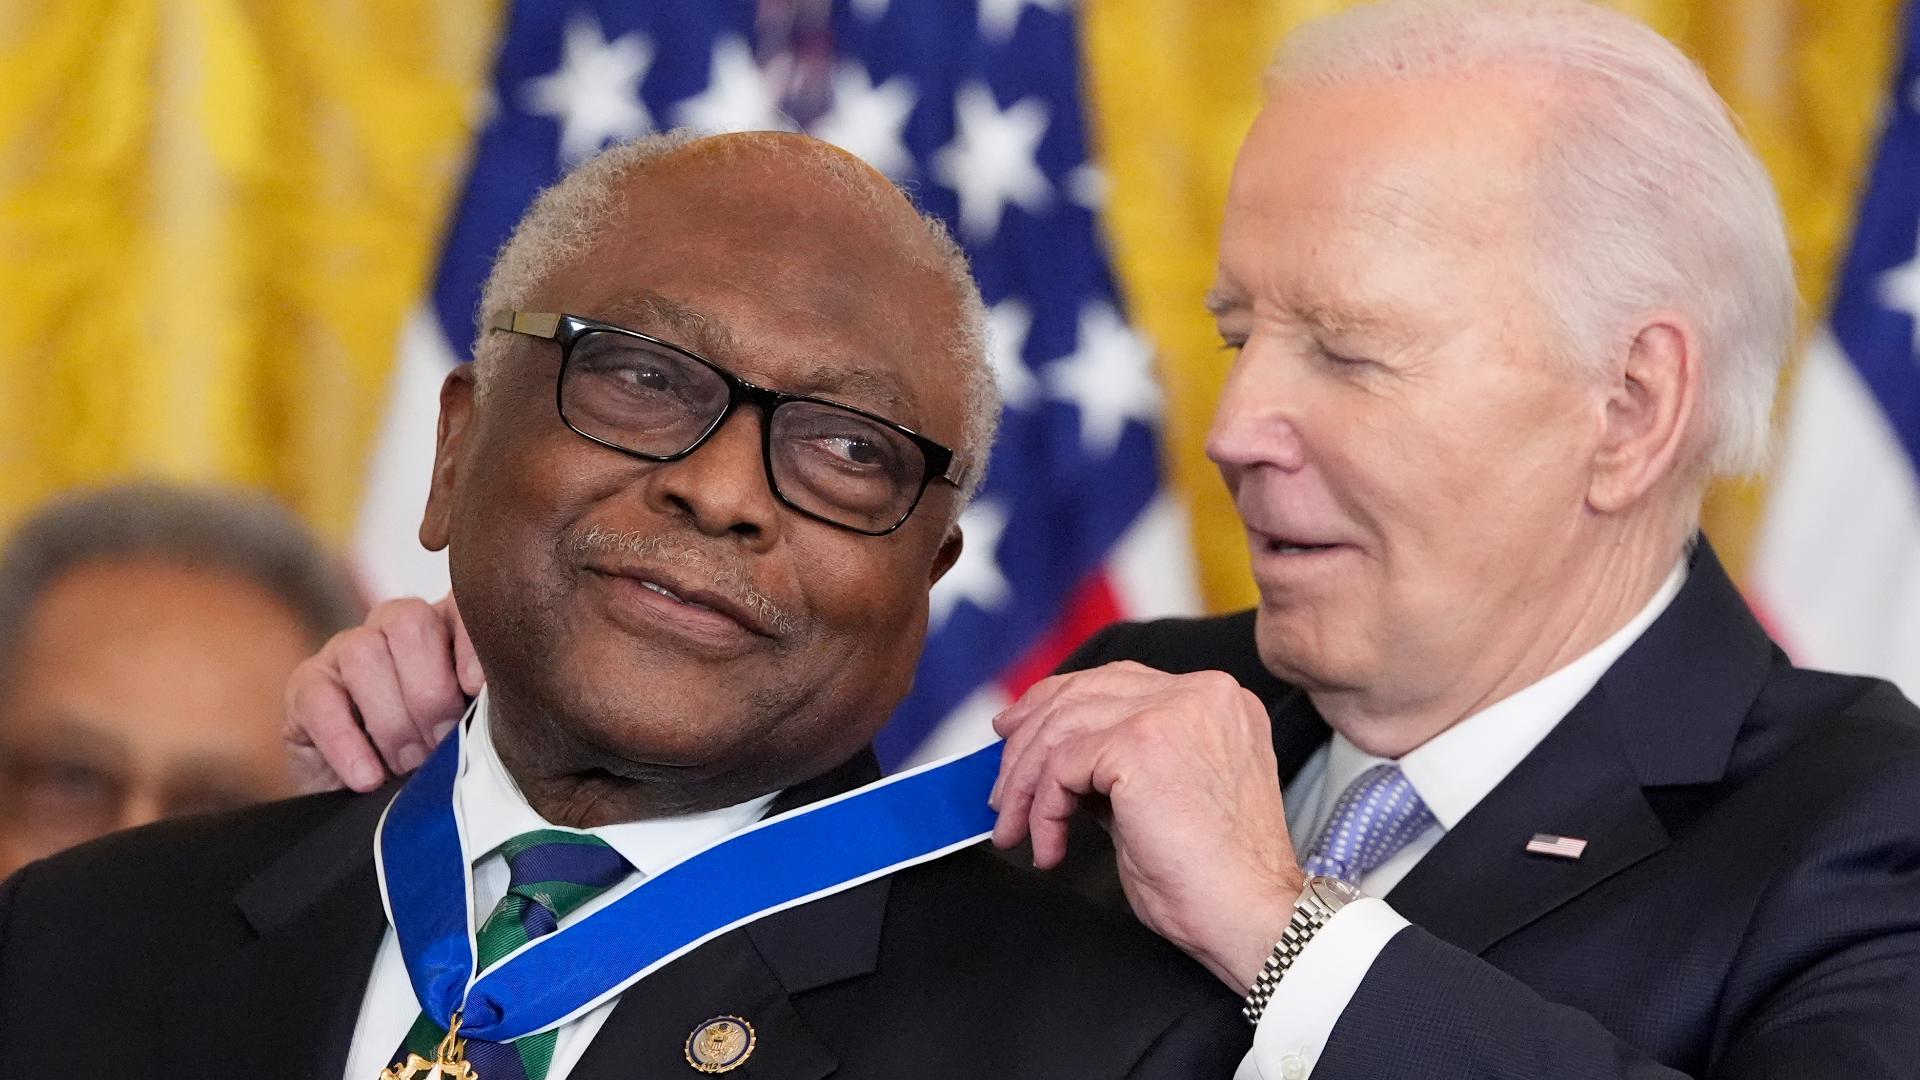 South Carolina's U.S. Rep. James Clyburn is among this year's recipients of the Presidential Medal of Honor.